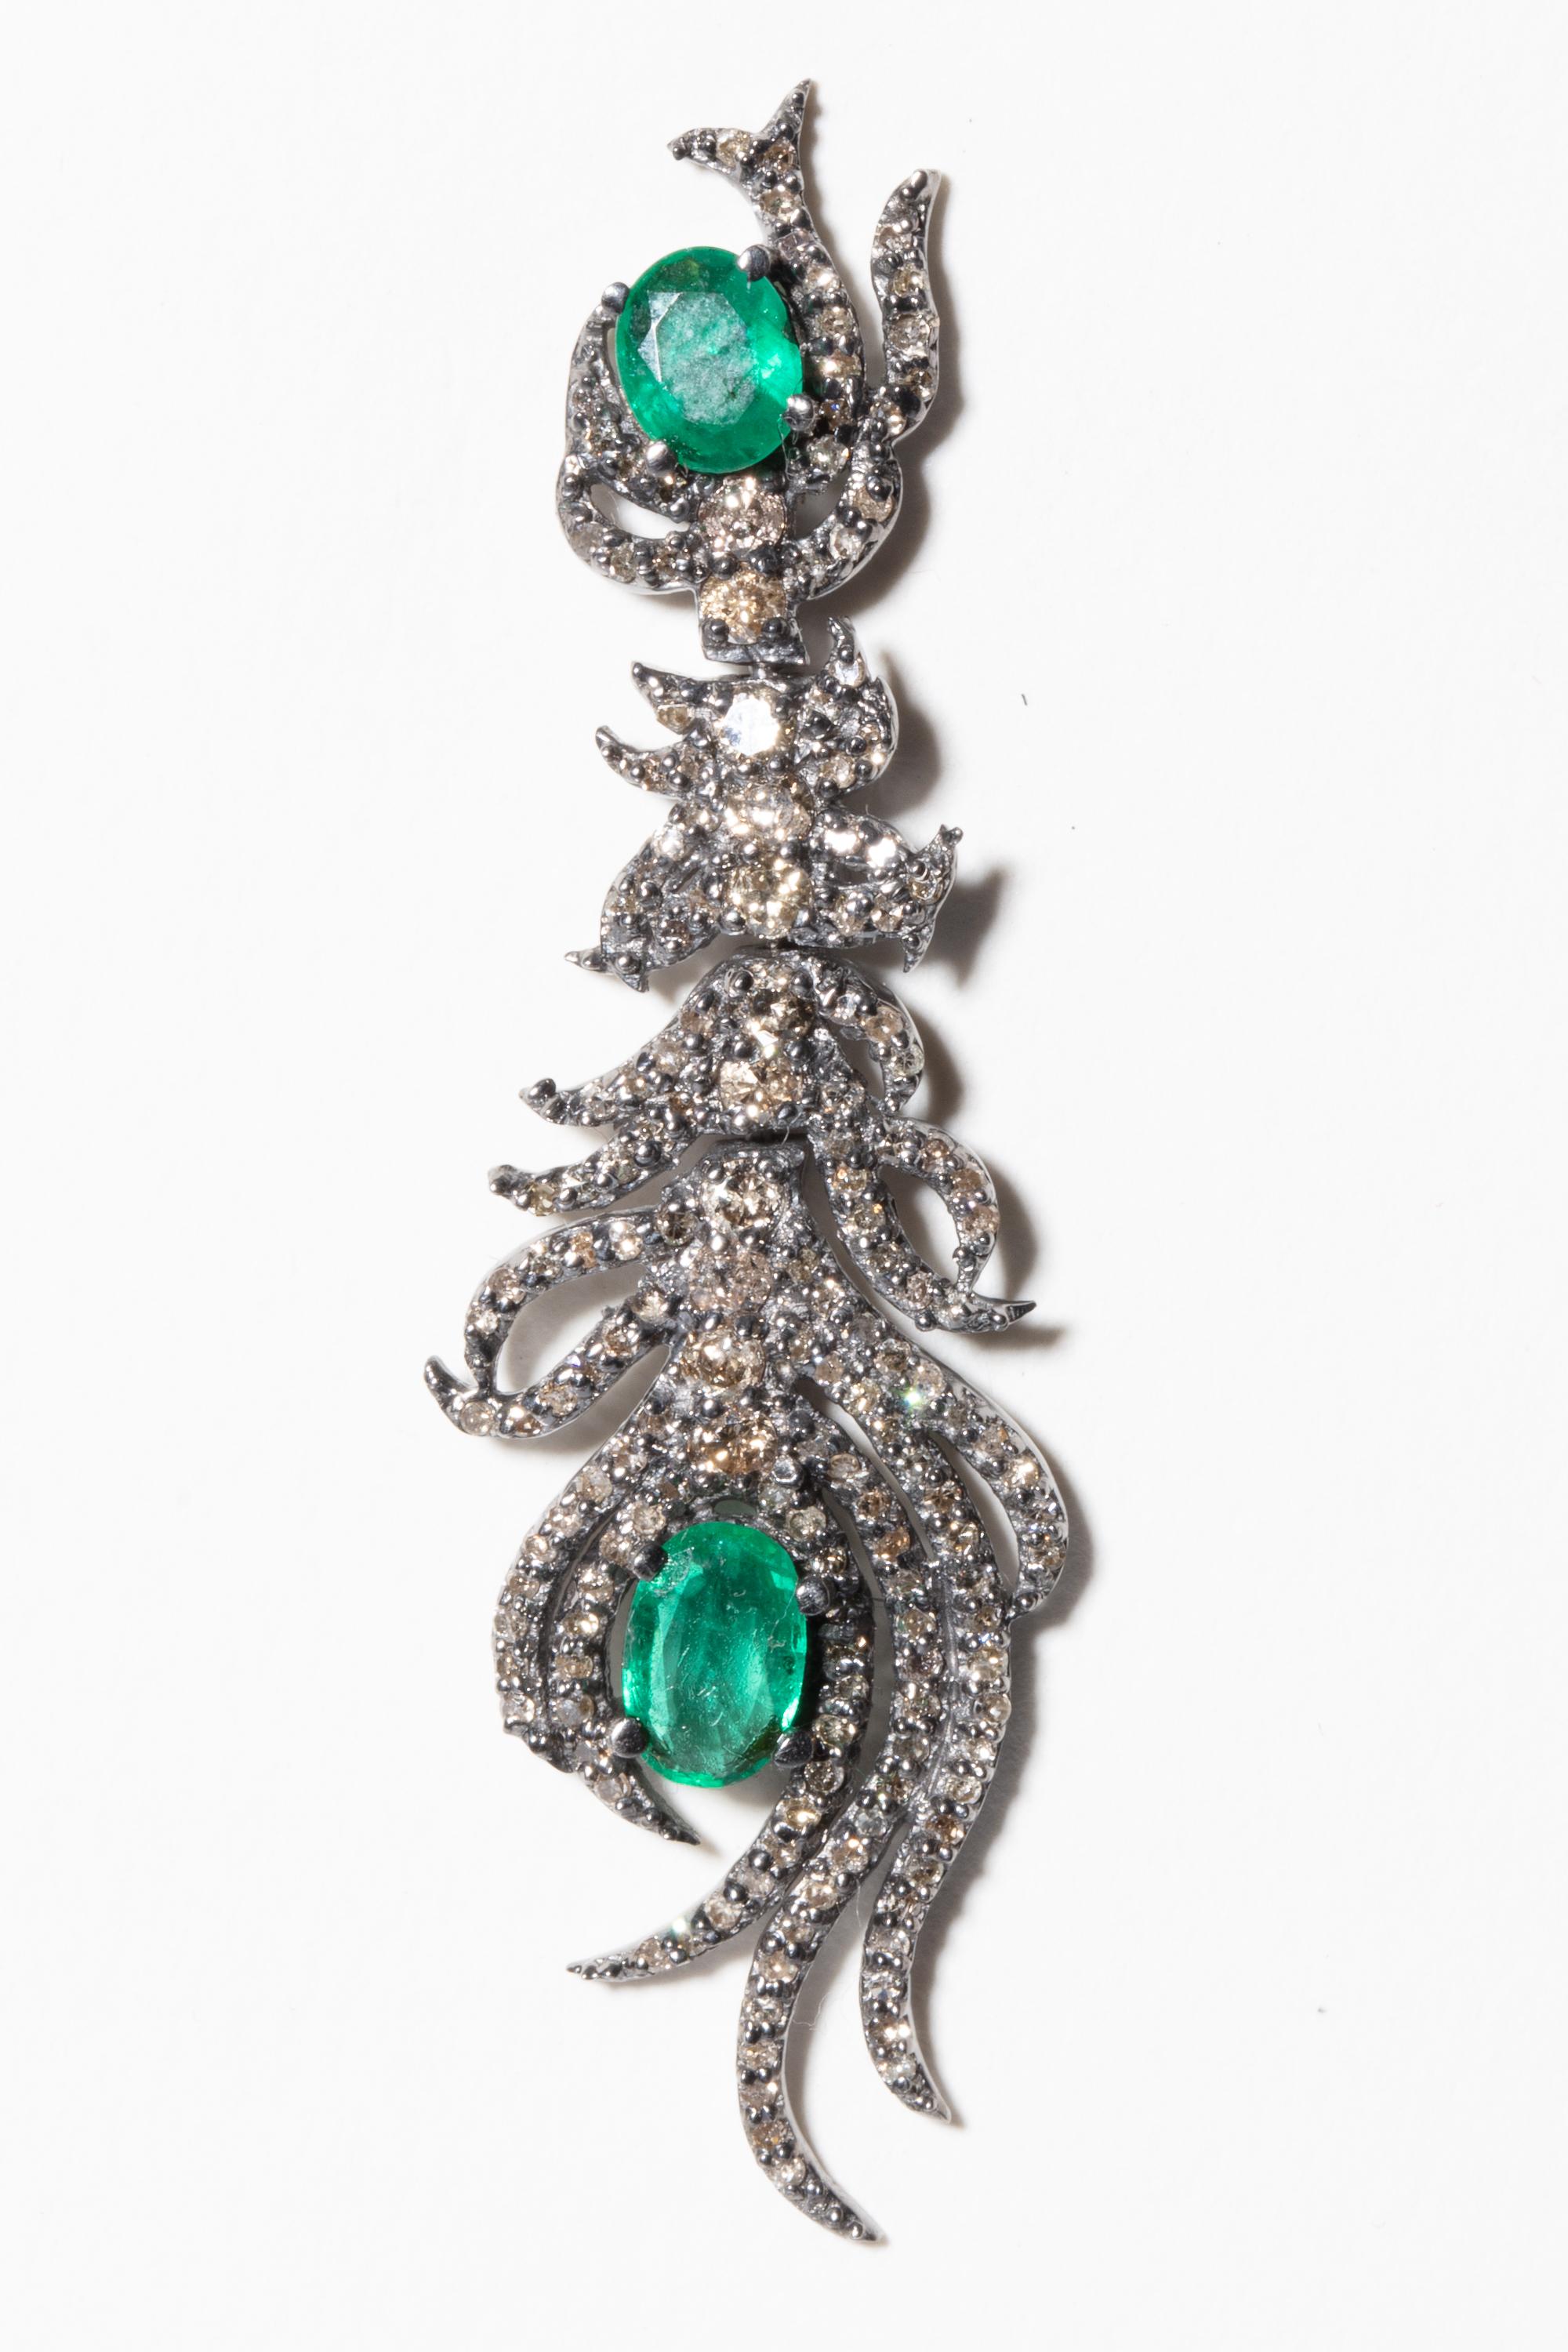 A pair of faceted emerald and pave-set diamond earrings in a stylized peacock feather design.  Larger bezel set diamonds down the spine which is hinged in two places to provide movement and articulation.  Set in sterling silver with an 18K gold post